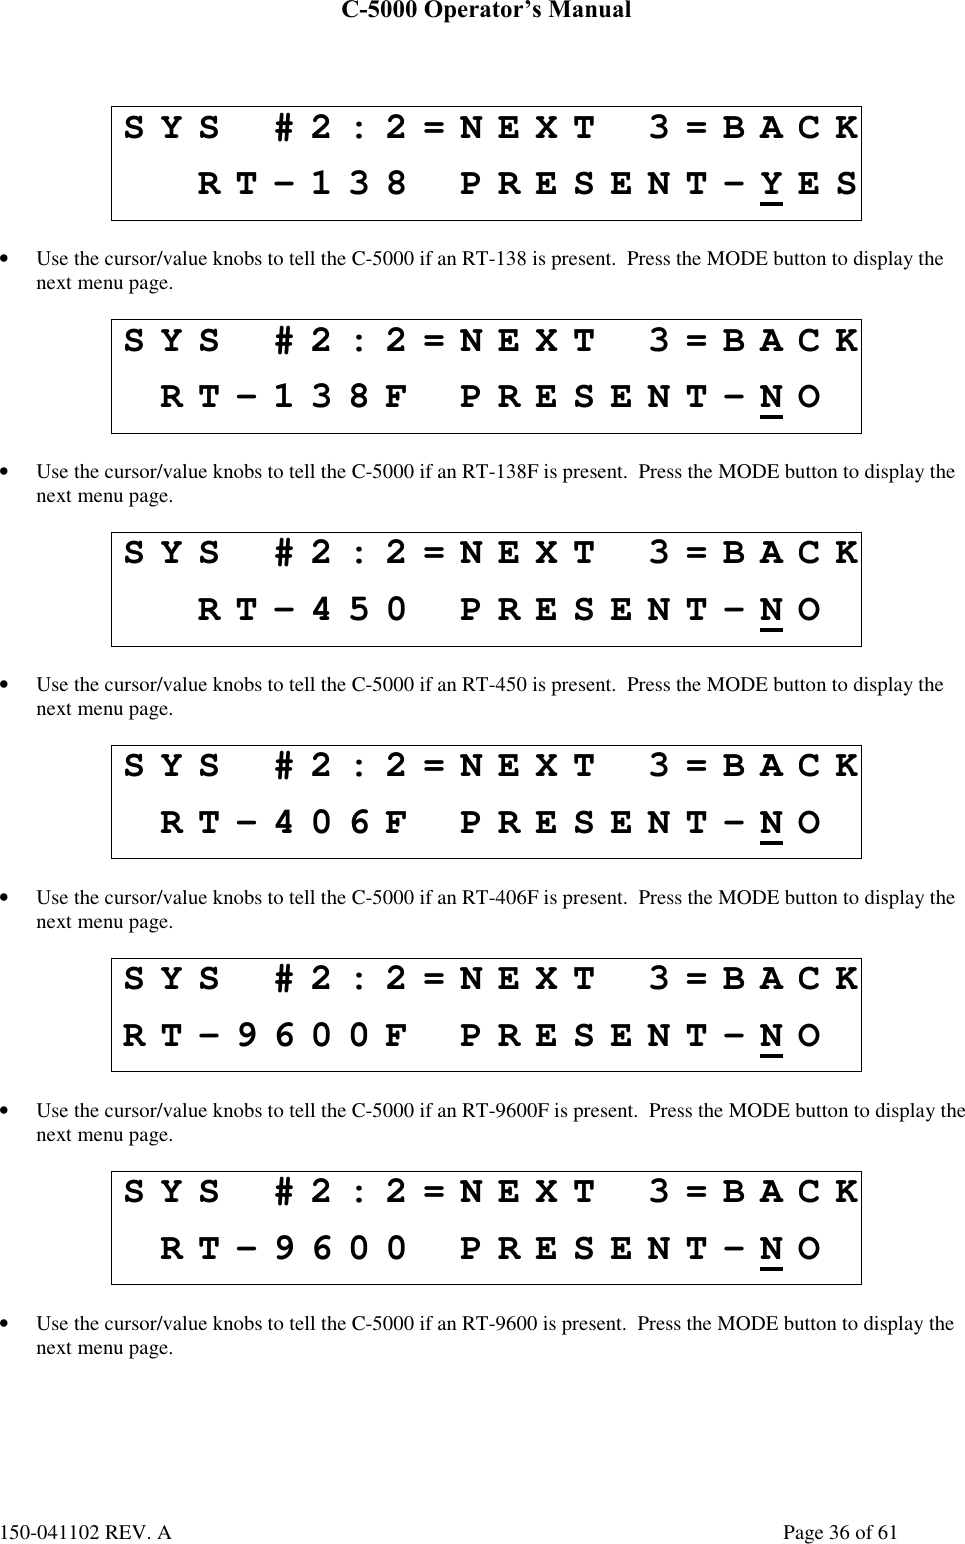 C-5000 Operator’s Manual150-041102 REV. A Page 36 of 61SYS #2:2=NEXT 3=BACKRT-138 PRESENT-YES• Use the cursor/value knobs to tell the C-5000 if an RT-138 is present.  Press the MODE button to display thenext menu page.SYS #2:2=NEXT 3=BACKRT-138F PRESENT-NO• Use the cursor/value knobs to tell the C-5000 if an RT-138F is present.  Press the MODE button to display thenext menu page.SYS #2:2=NEXT 3=BACKRT-450 PRESENT-NO• Use the cursor/value knobs to tell the C-5000 if an RT-450 is present.  Press the MODE button to display thenext menu page.SYS #2:2=NEXT 3=BACKRT-406F PRESENT-NO• Use the cursor/value knobs to tell the C-5000 if an RT-406F is present.  Press the MODE button to display thenext menu page.SYS #2:2=NEXT 3=BACKRT-9600F PRESENT-NO• Use the cursor/value knobs to tell the C-5000 if an RT-9600F is present.  Press the MODE button to display thenext menu page.SYS #2:2=NEXT 3=BACKRT-9600 PRESENT-NO• Use the cursor/value knobs to tell the C-5000 if an RT-9600 is present.  Press the MODE button to display thenext menu page.